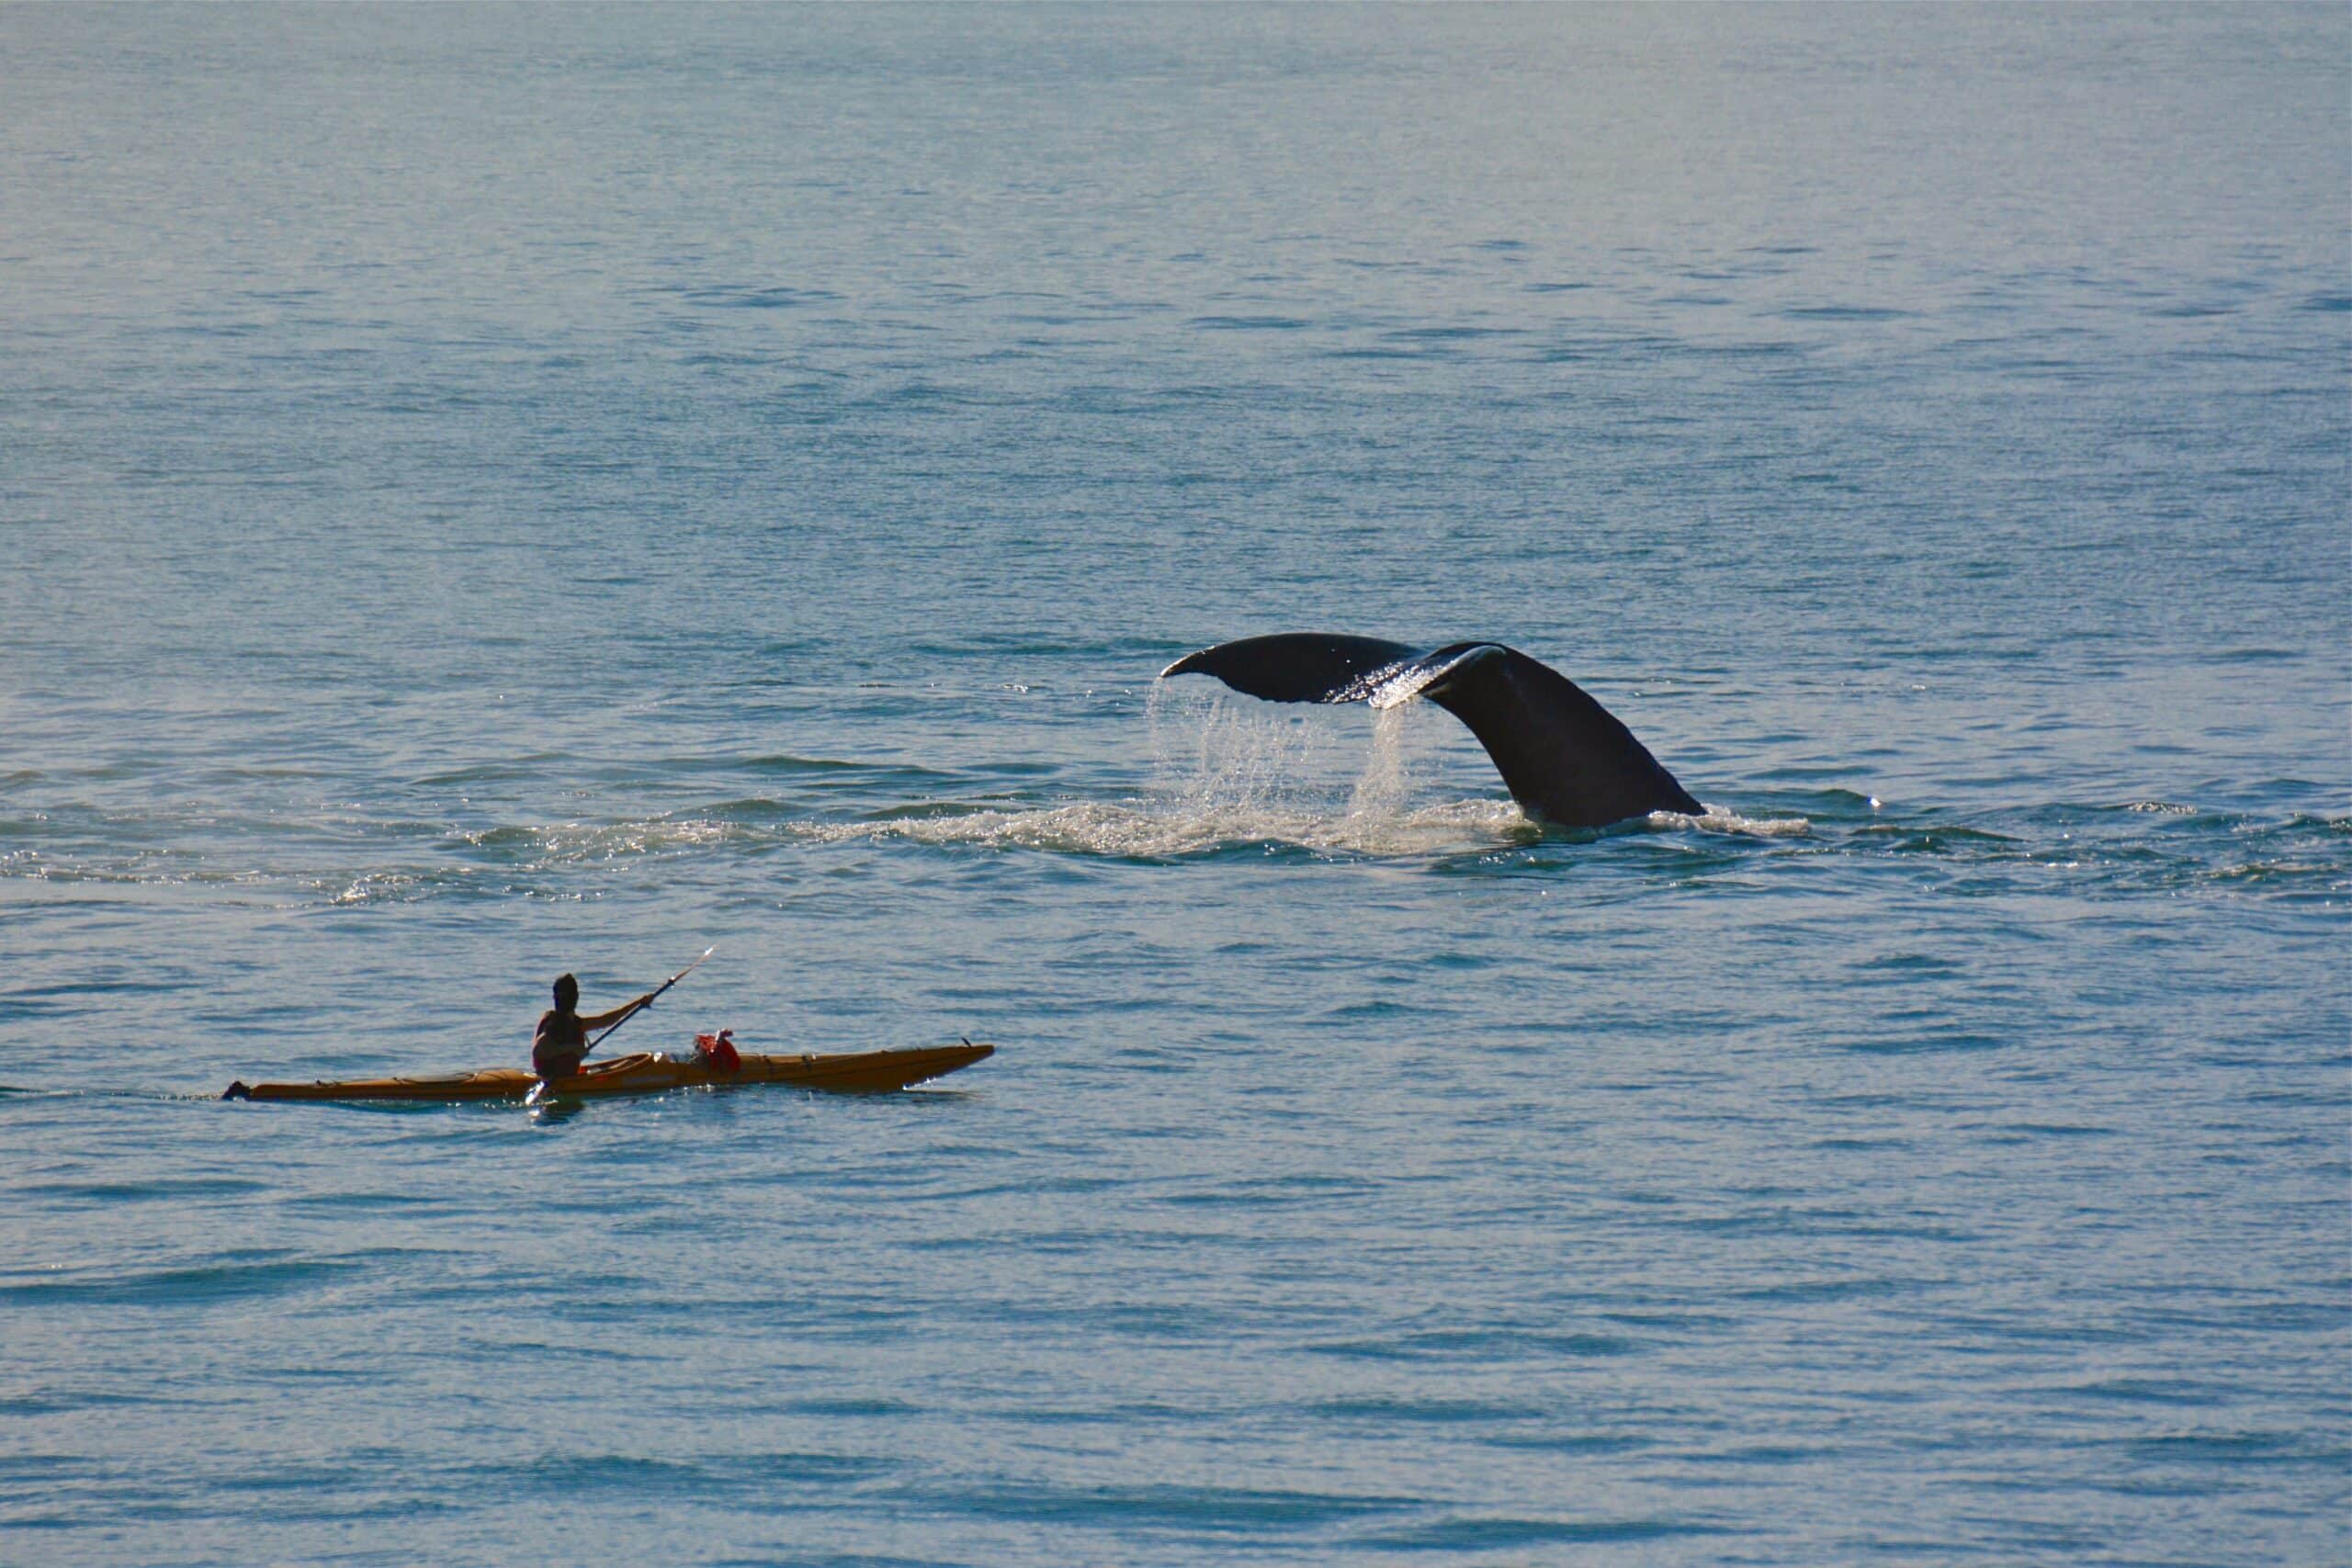 blue whale next to kayak